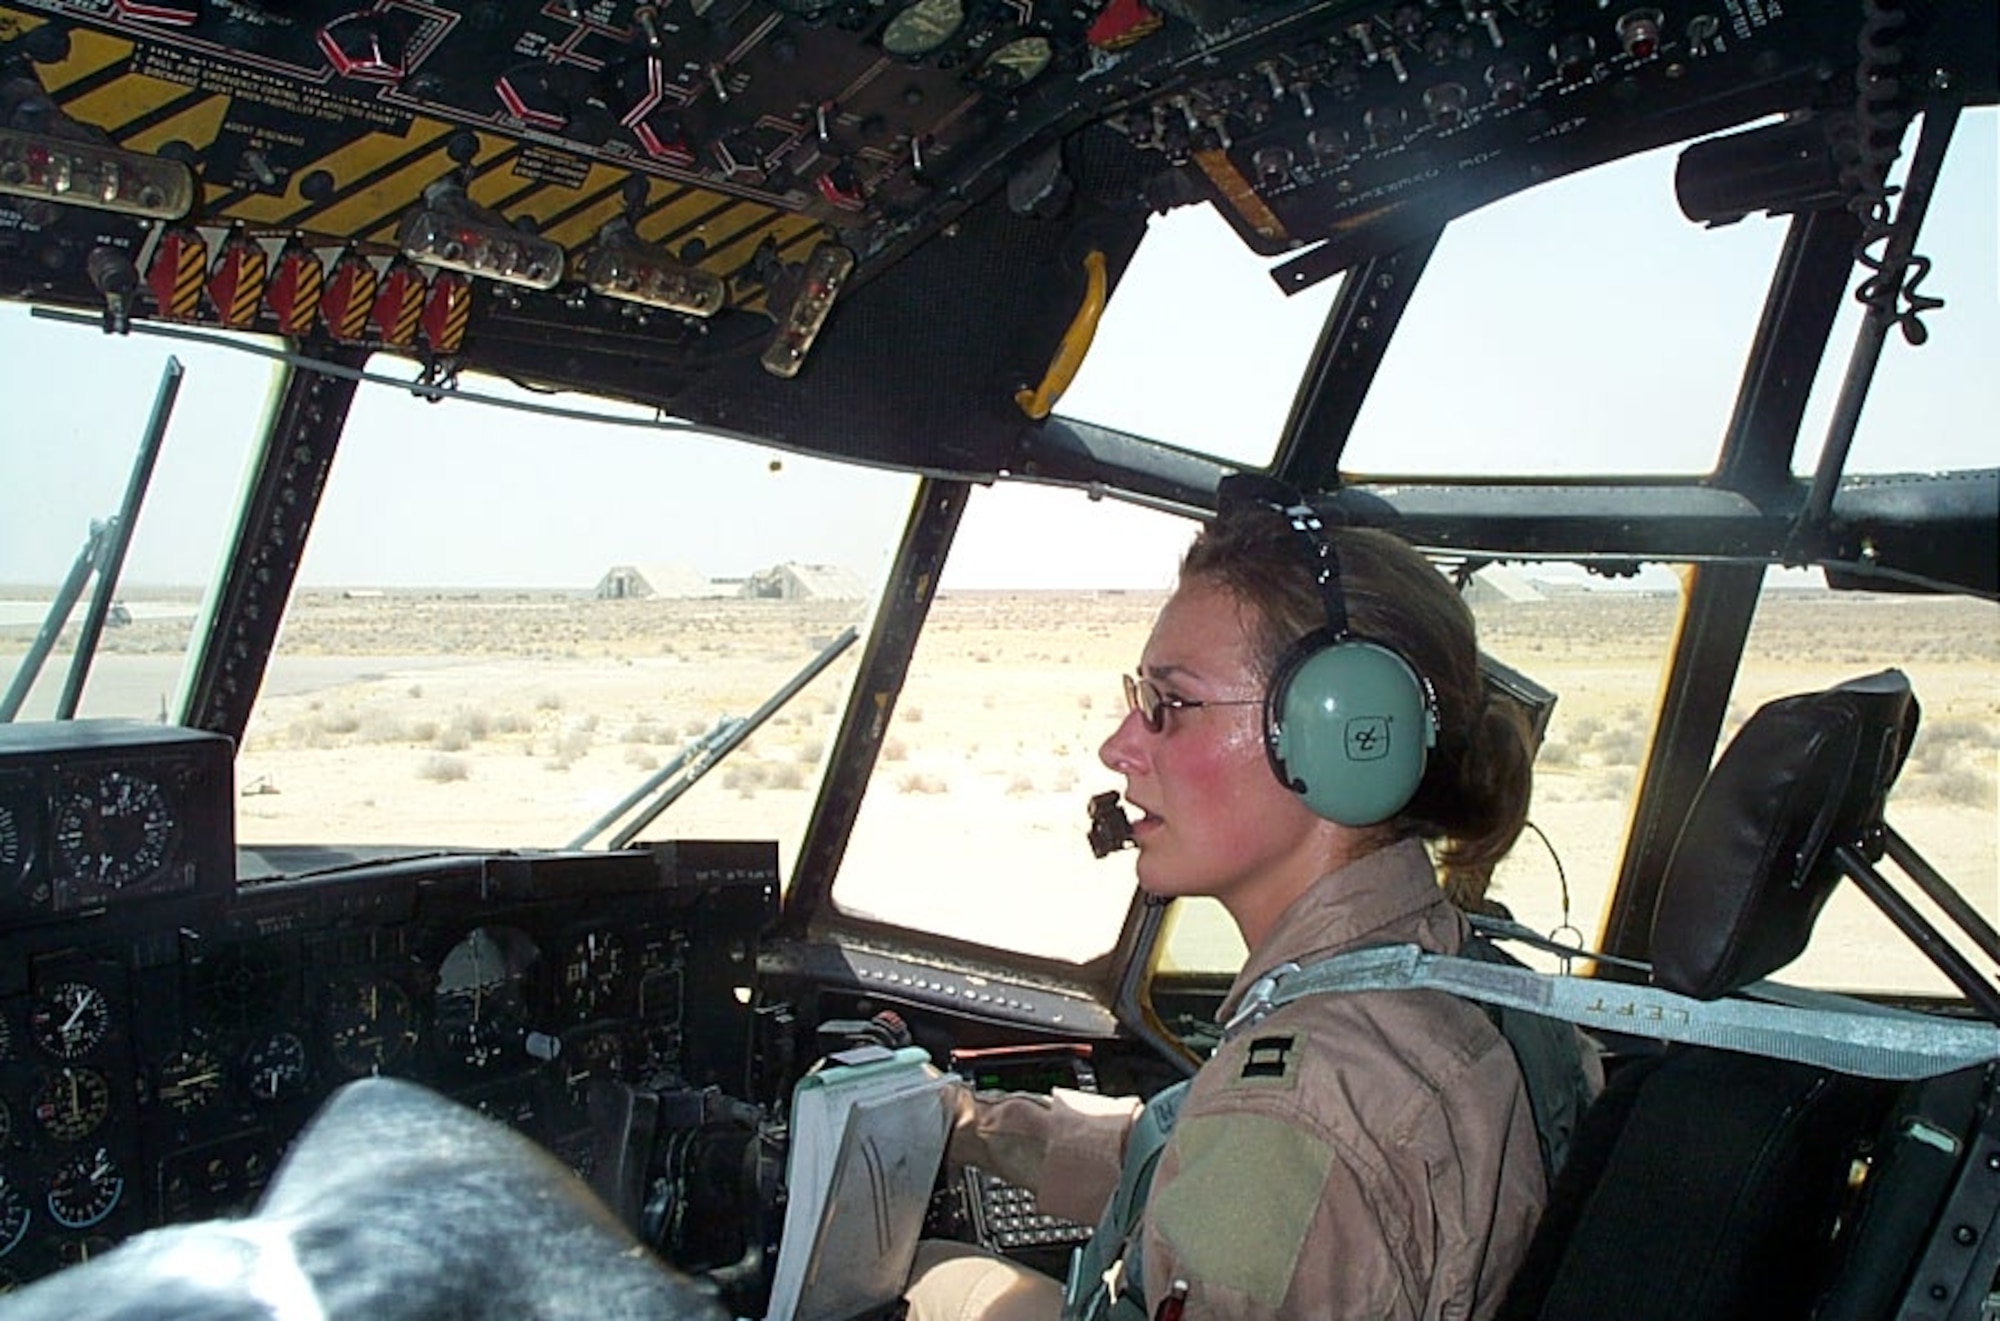 Maj. Kristen R. Snow, a Captain in the United States Air Force at the time of this photo, completes a combat air mission in an HC-130 at a forward operating base in Southwest Asia in direct support of Operation Enduring Freedom.  (Photo courtesy of Maj. Kristen R. Snow)